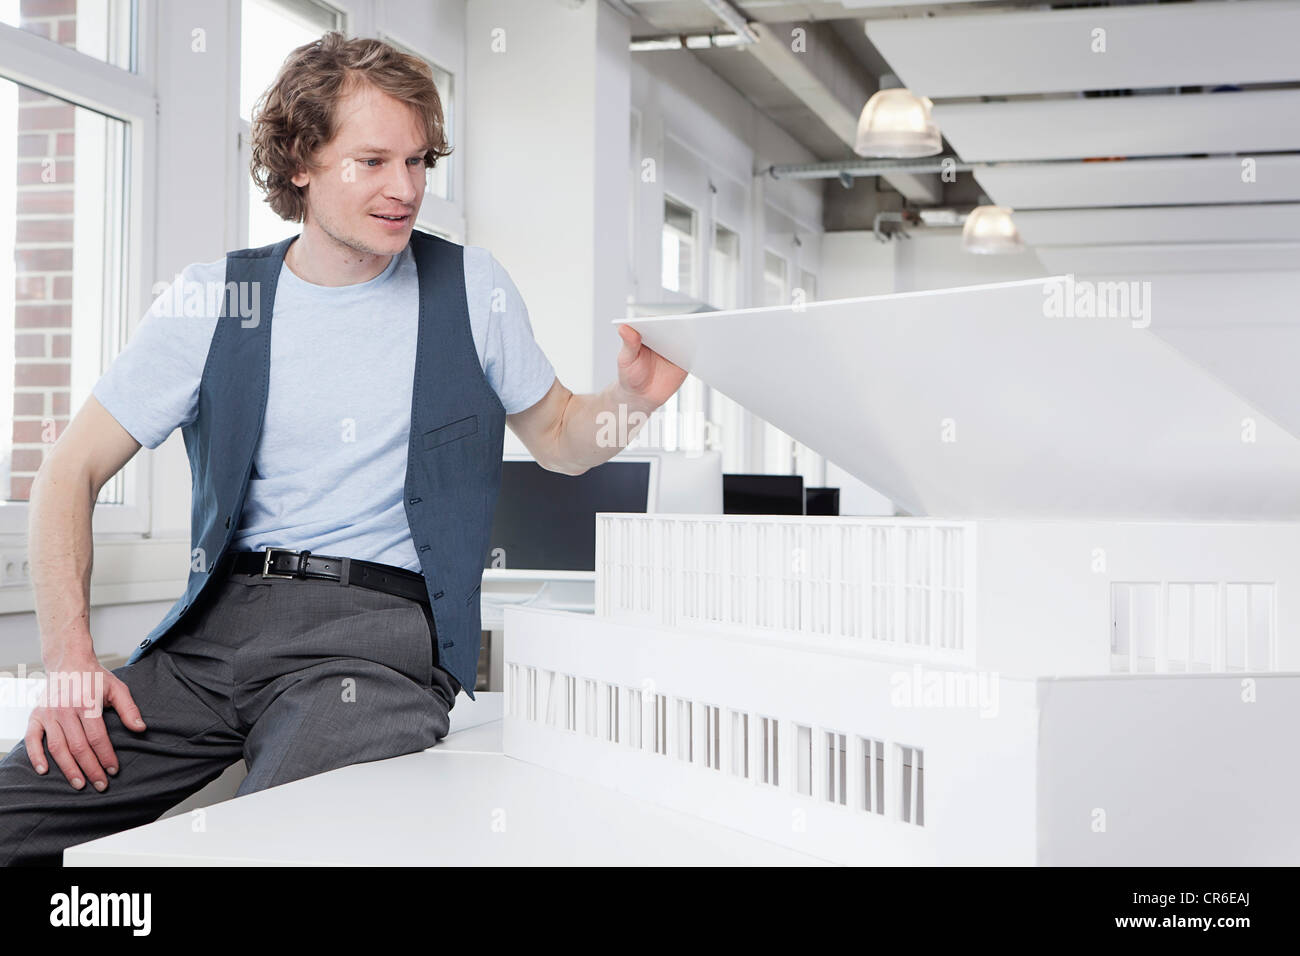 Germany, Bavaria, Munich, Architect looking at architectural model Banque D'Images